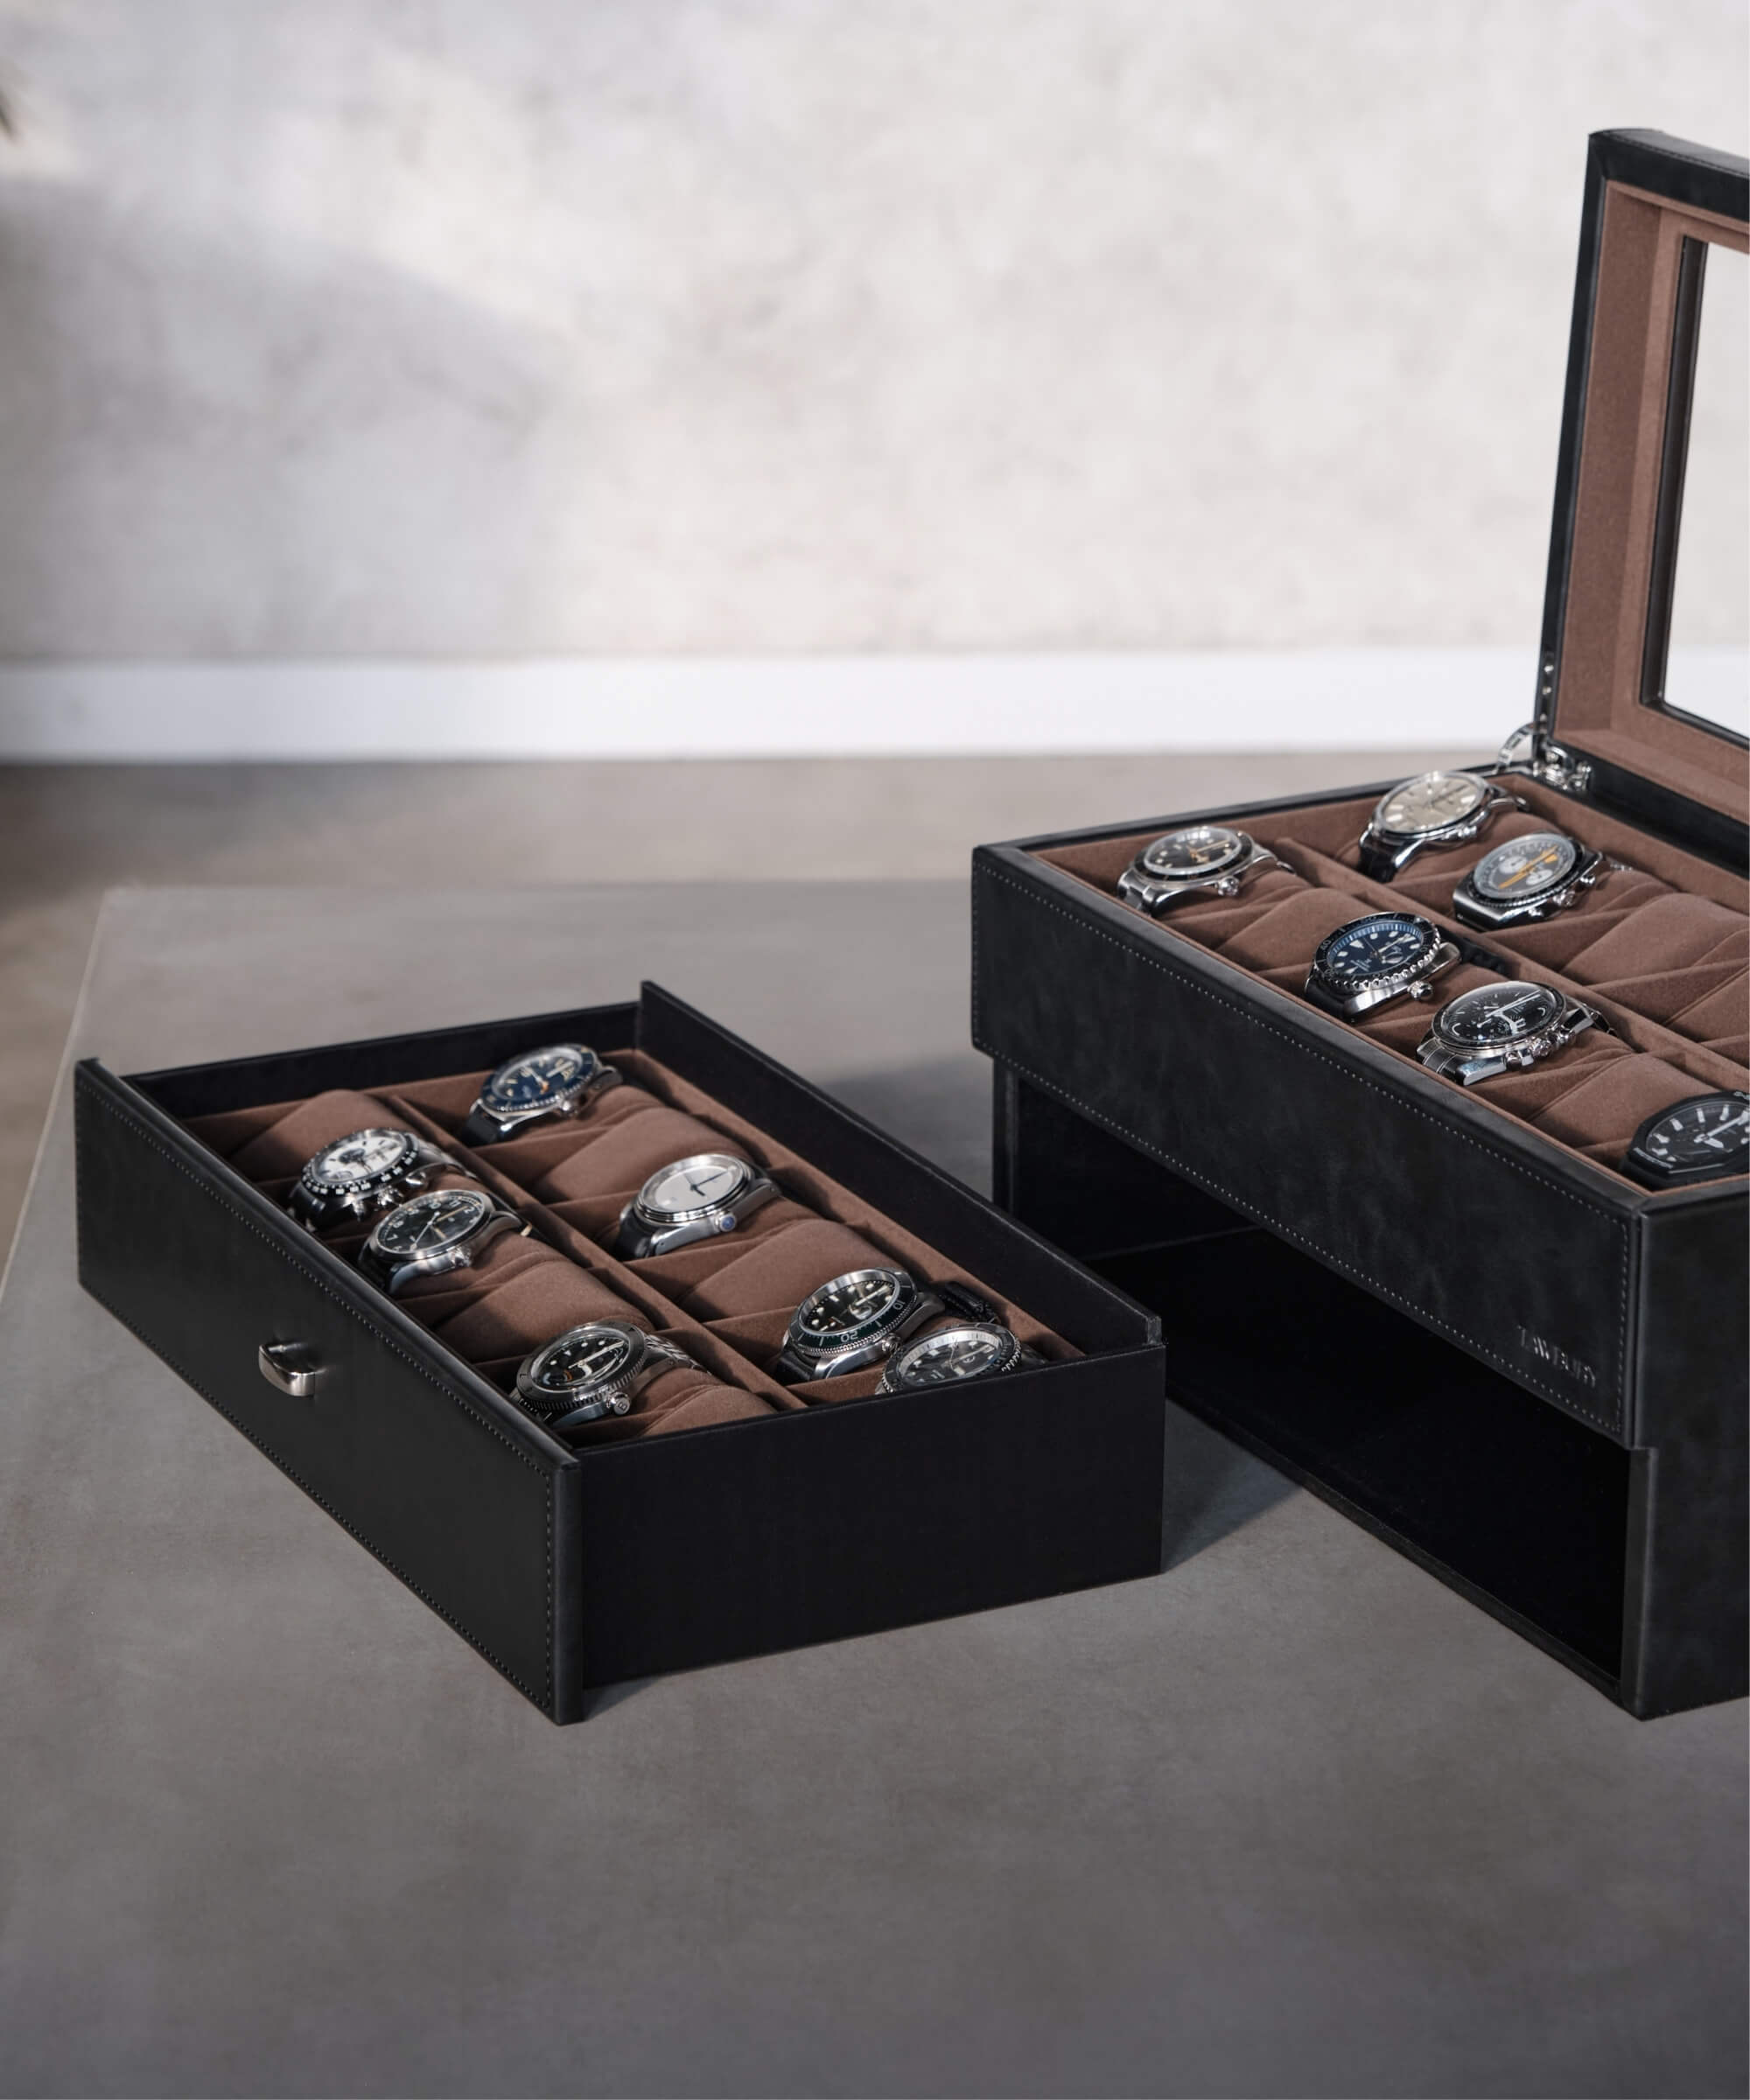 A TAWBURY Bayswater 24 Slot Watch Box with Drawer - Black that organizes several timepieces.